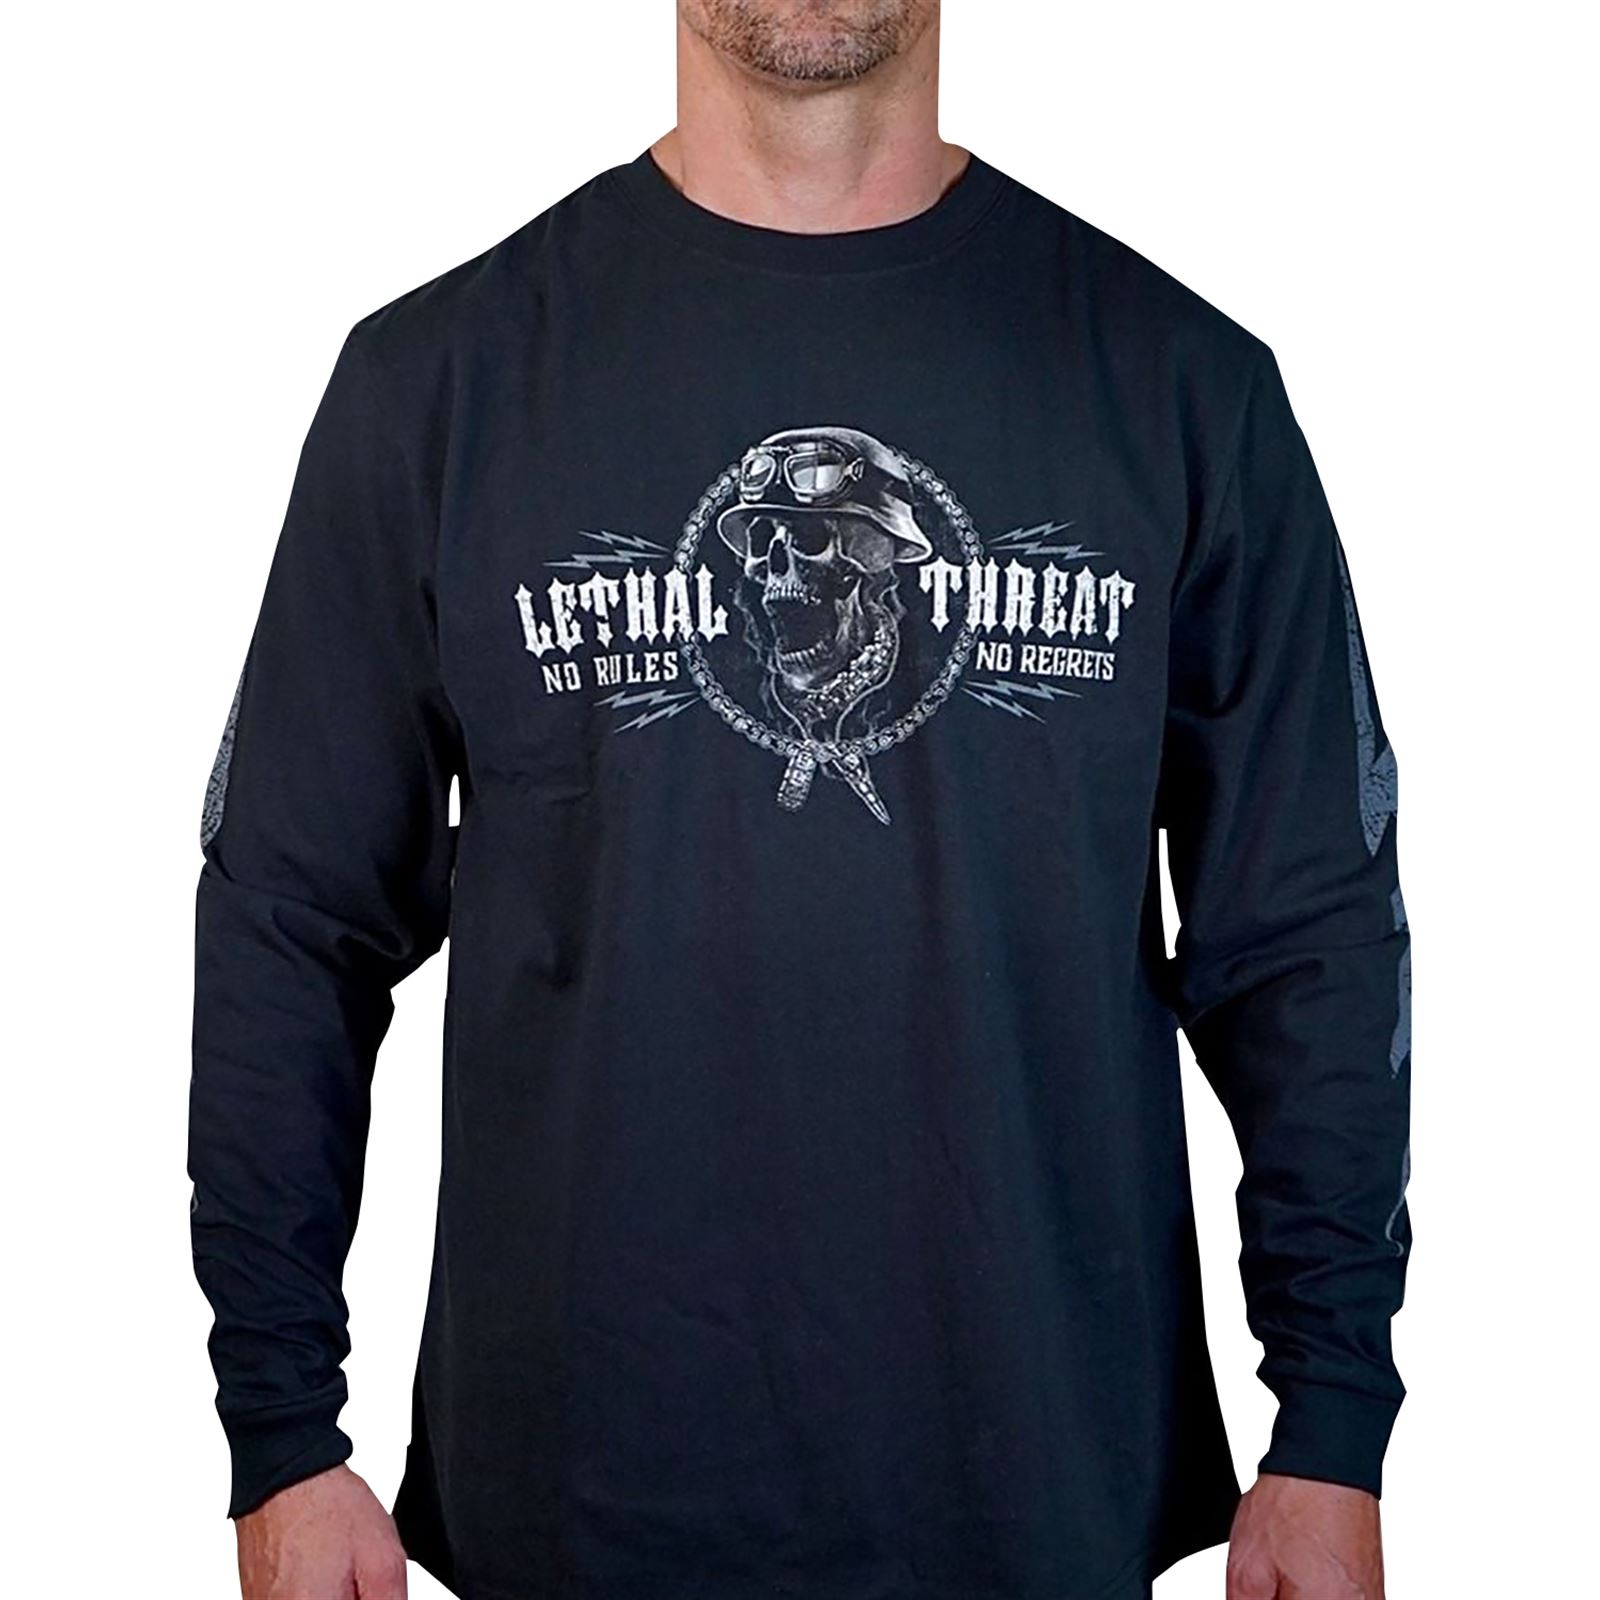 Lethal Threat Decals Flash and Bones Long-Sleeve T-Shirt - Black - Large